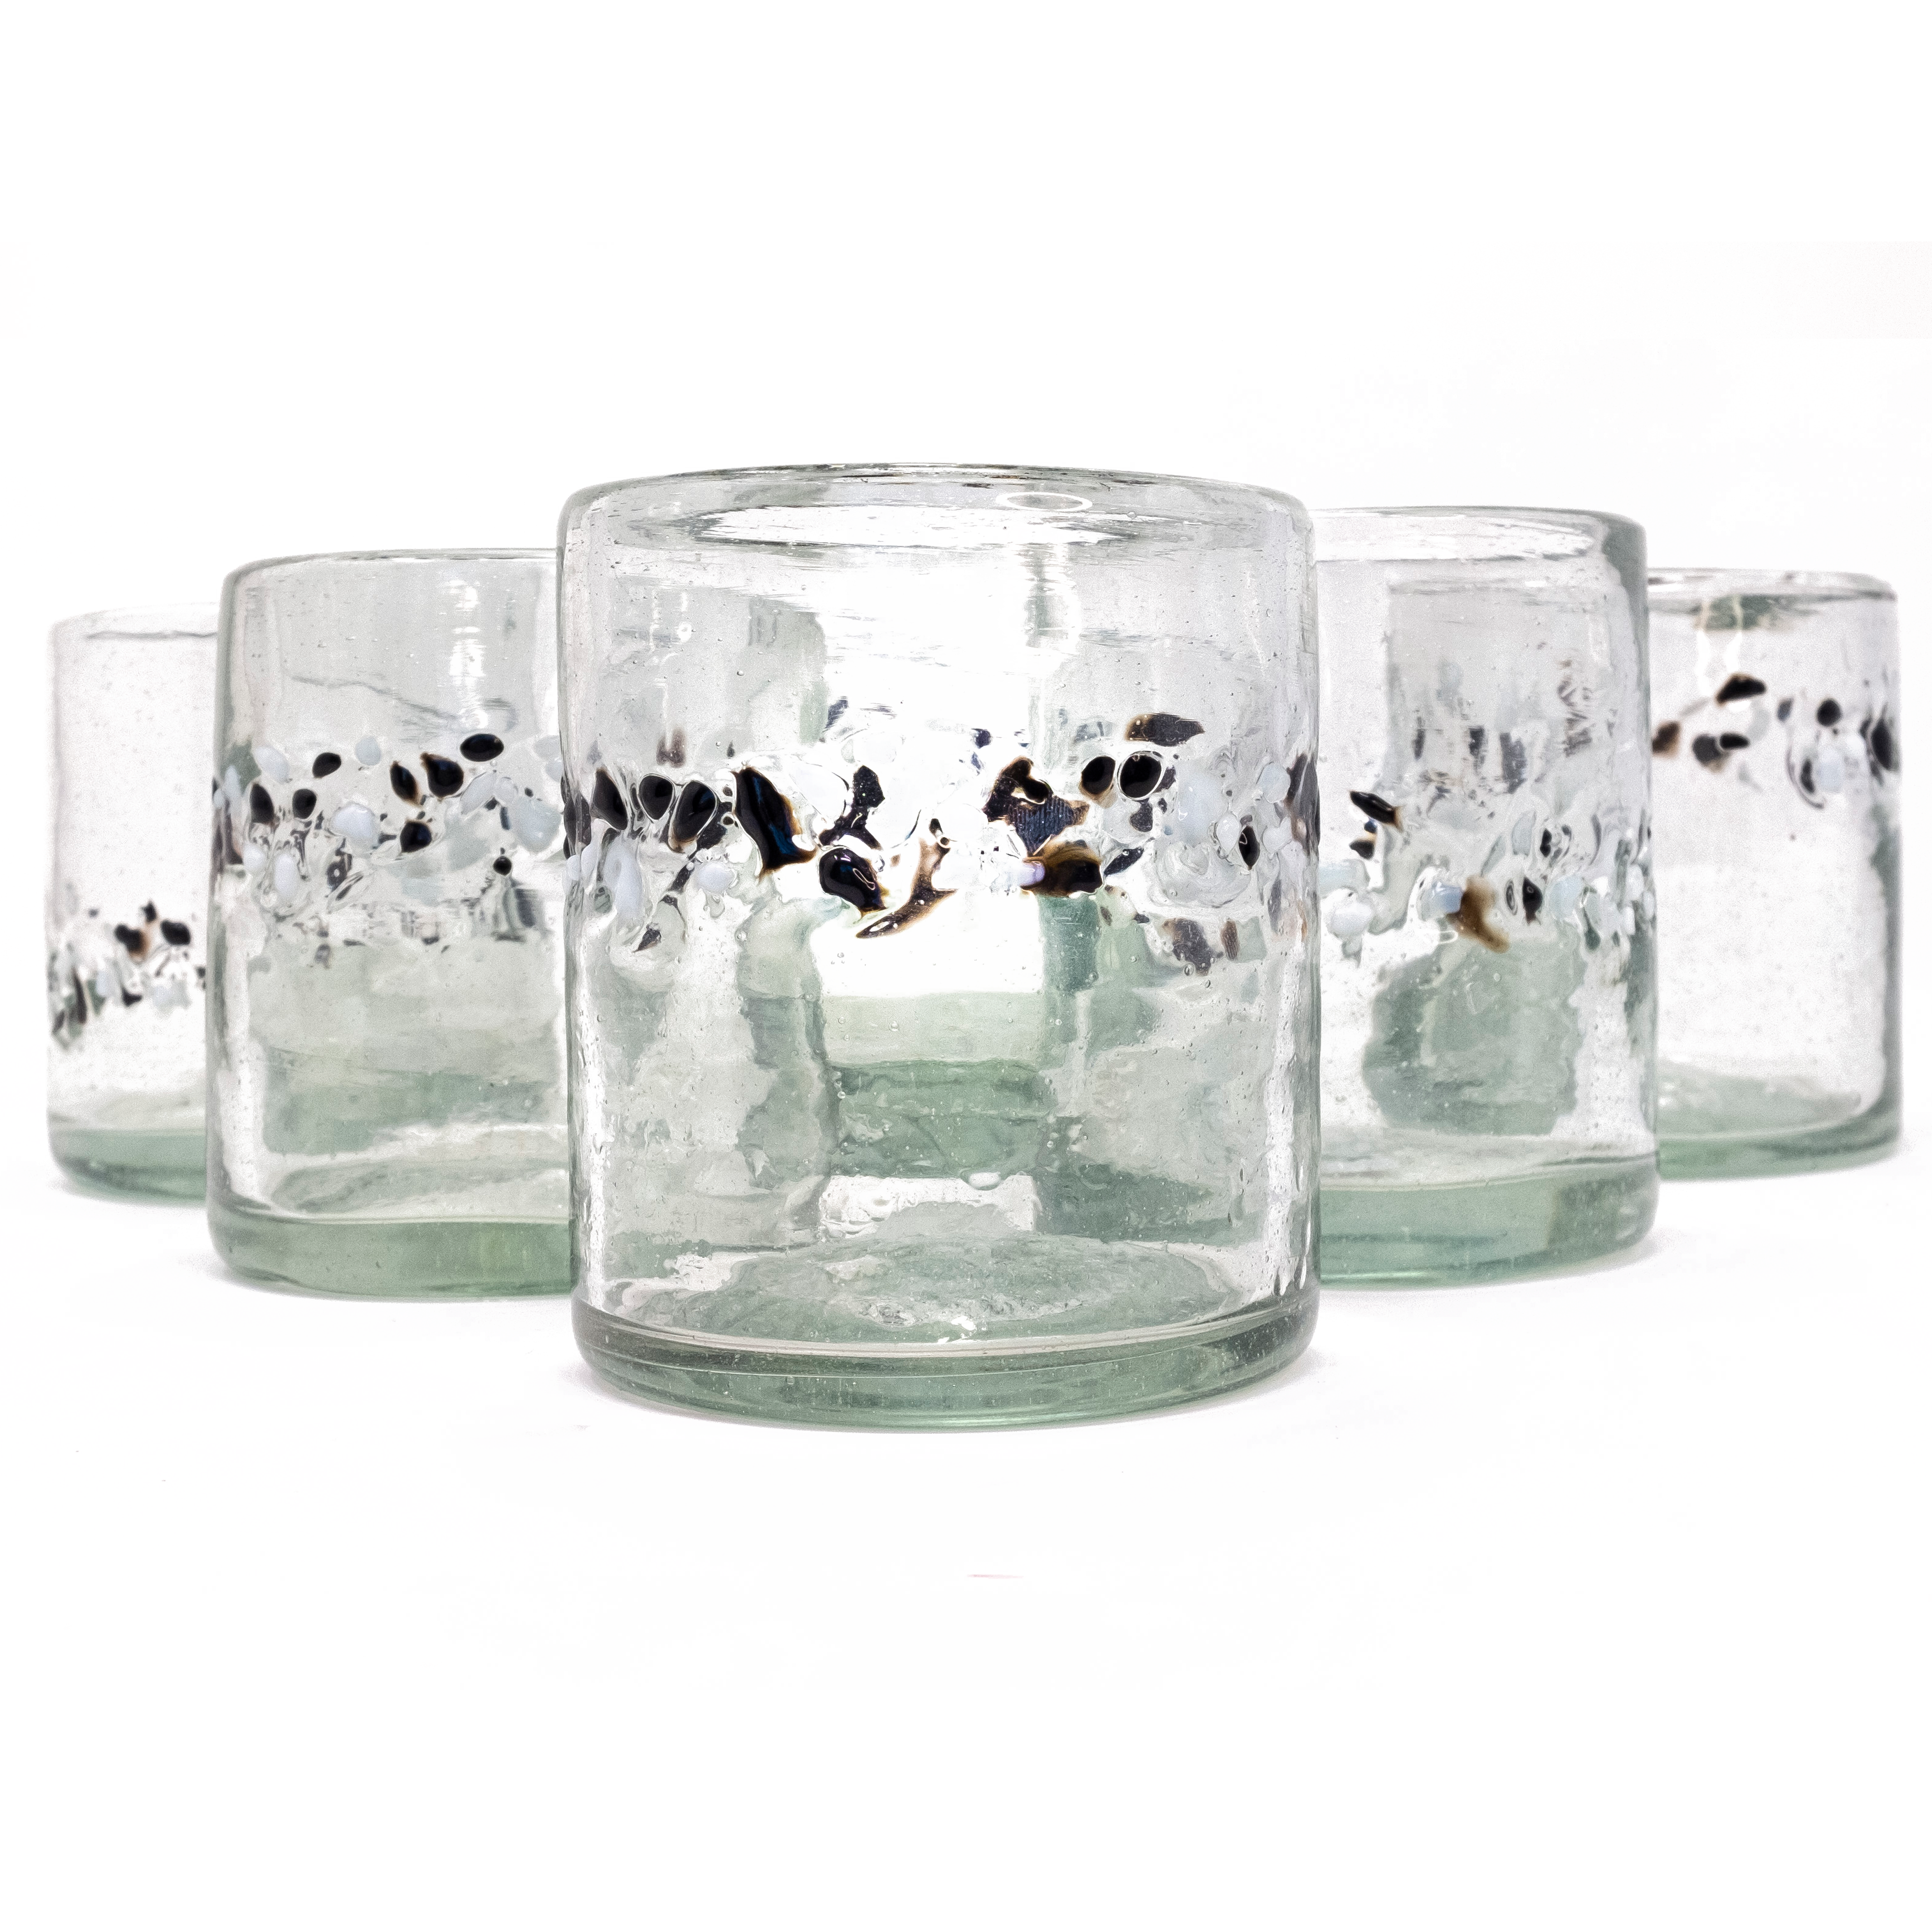 Black & White Pebble Handcrafted Short Tumbler - 12 oz - Set of 6 - Orion's Table 